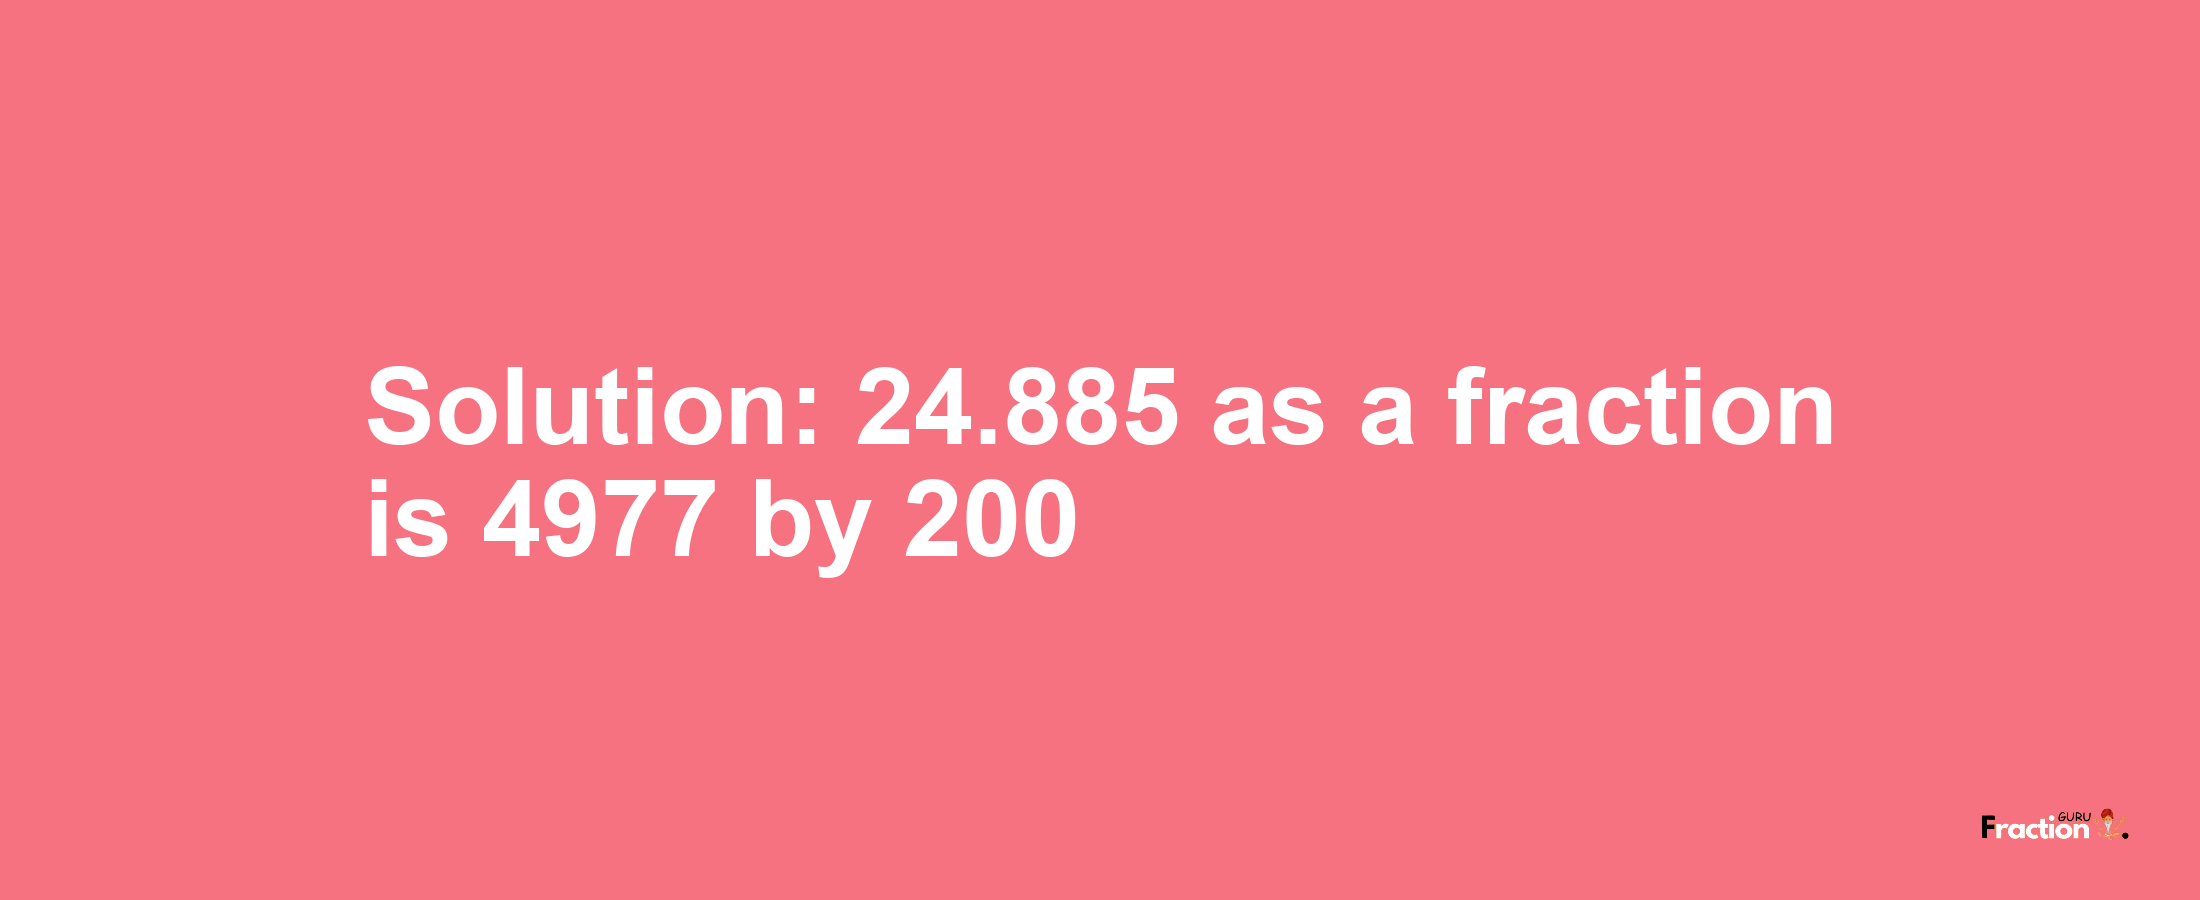 Solution:24.885 as a fraction is 4977/200